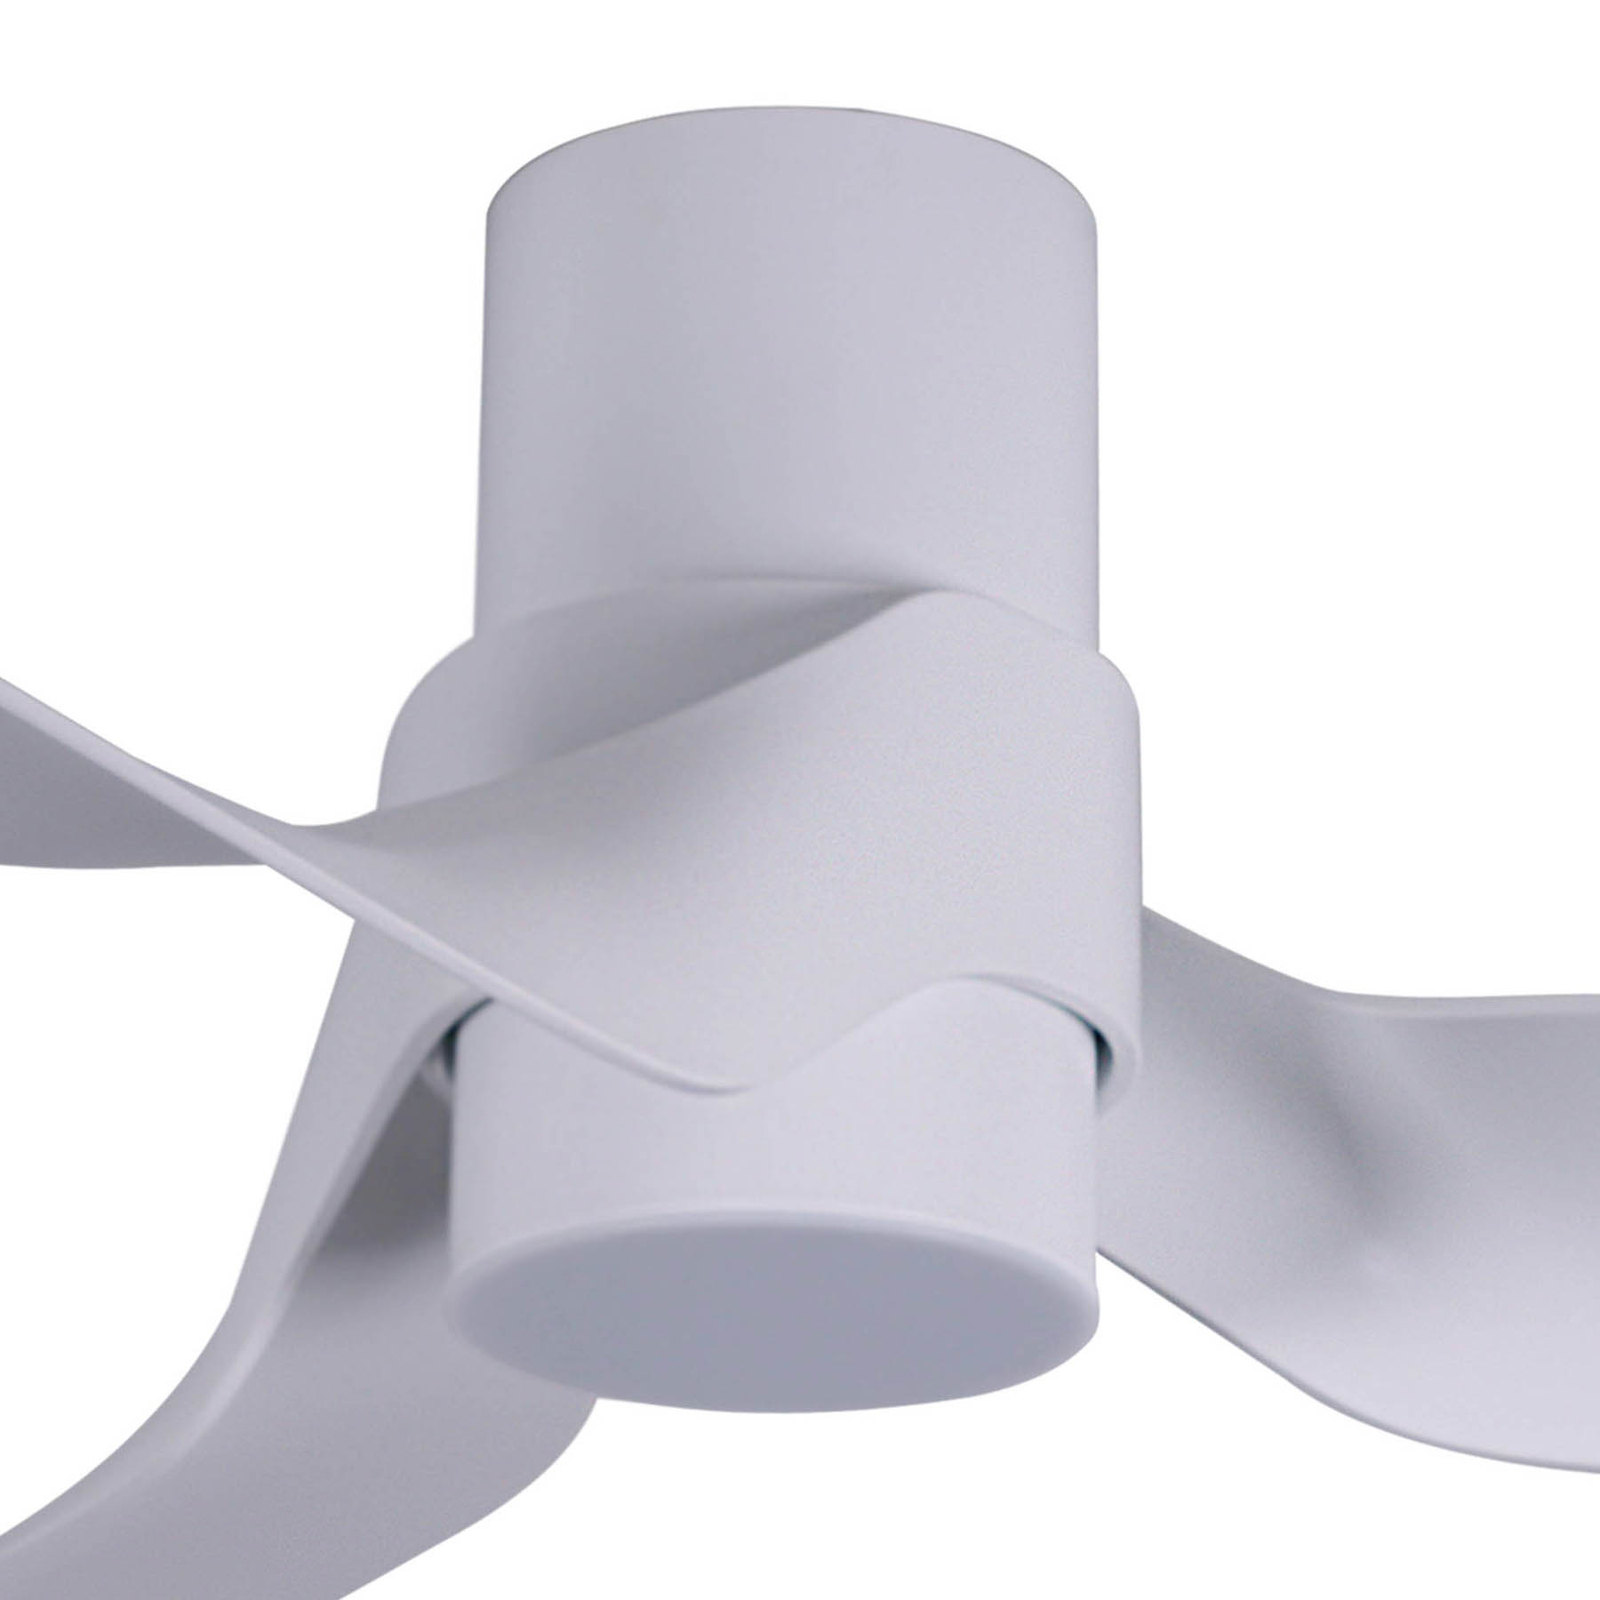 Beacon ceiling fan with light Nautica, white, quiet